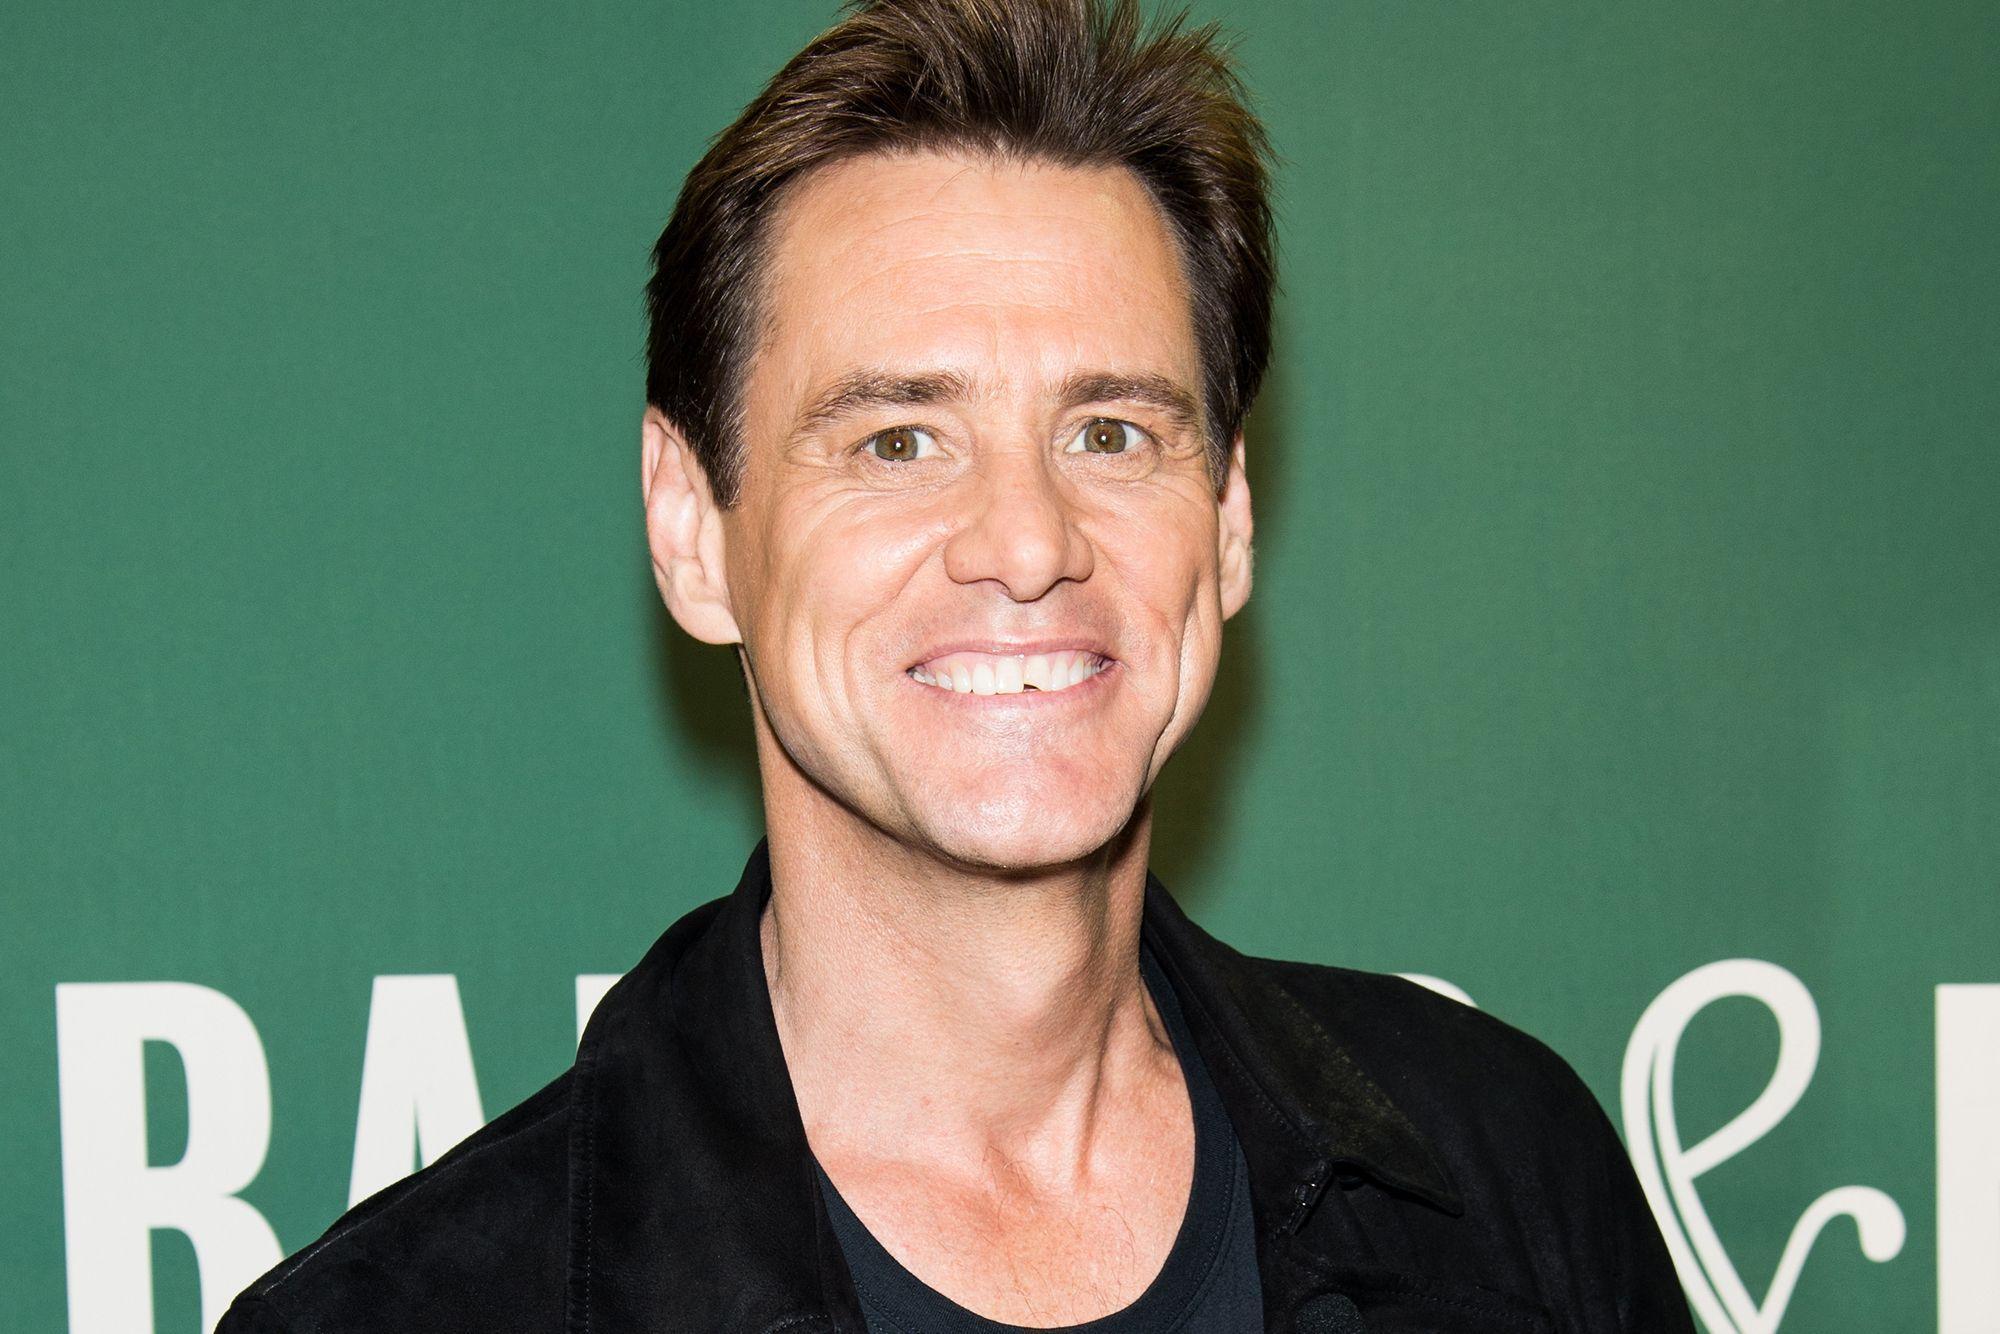 Jim Carrey Wallpaper Image Photo Picture Background